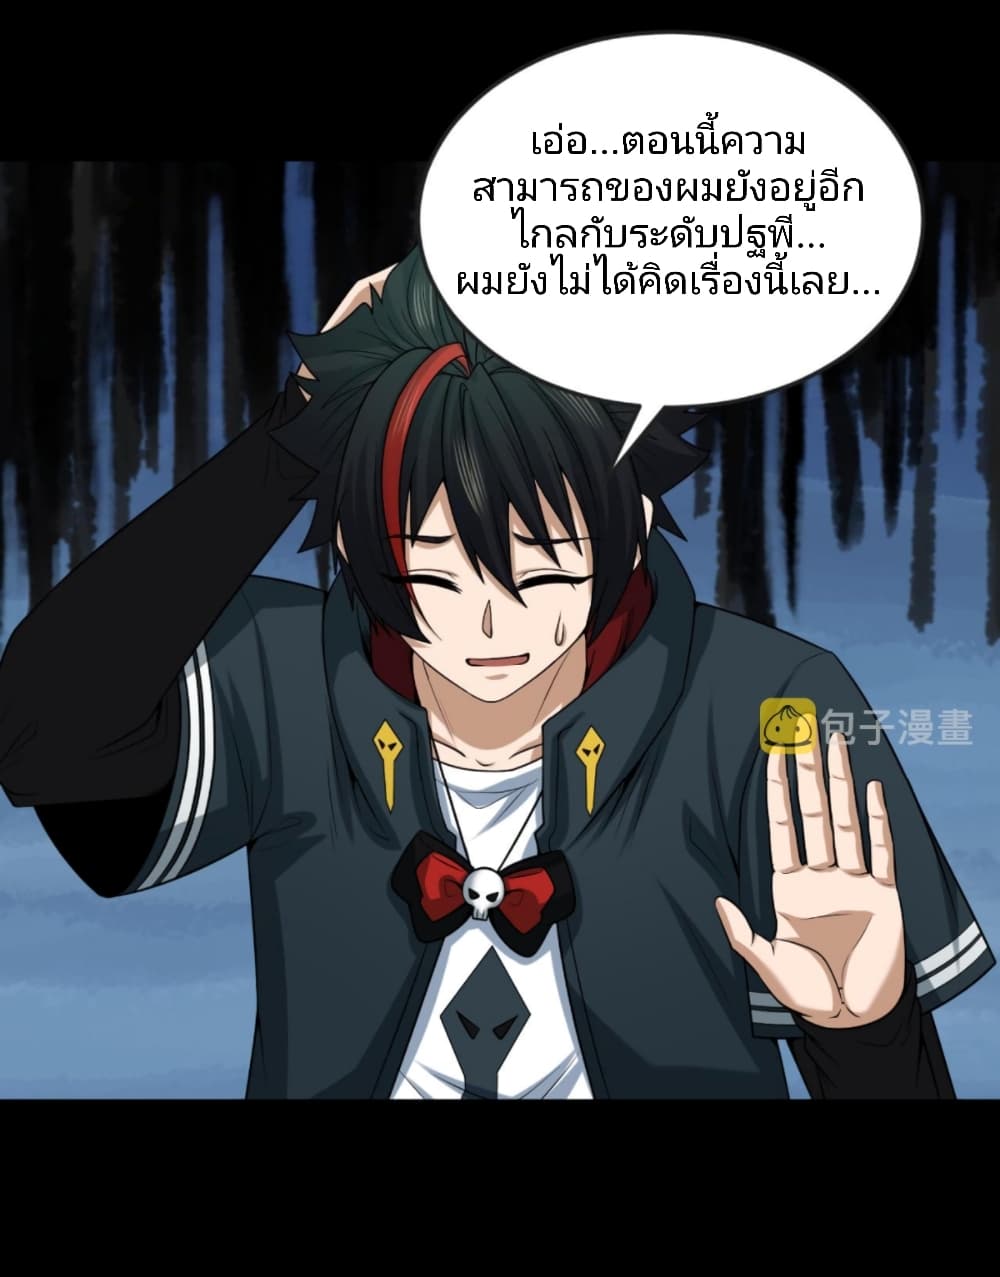 The Age of Ghost Spirits à¸à¸­à¸à¸à¸µà¹ 40 (18)